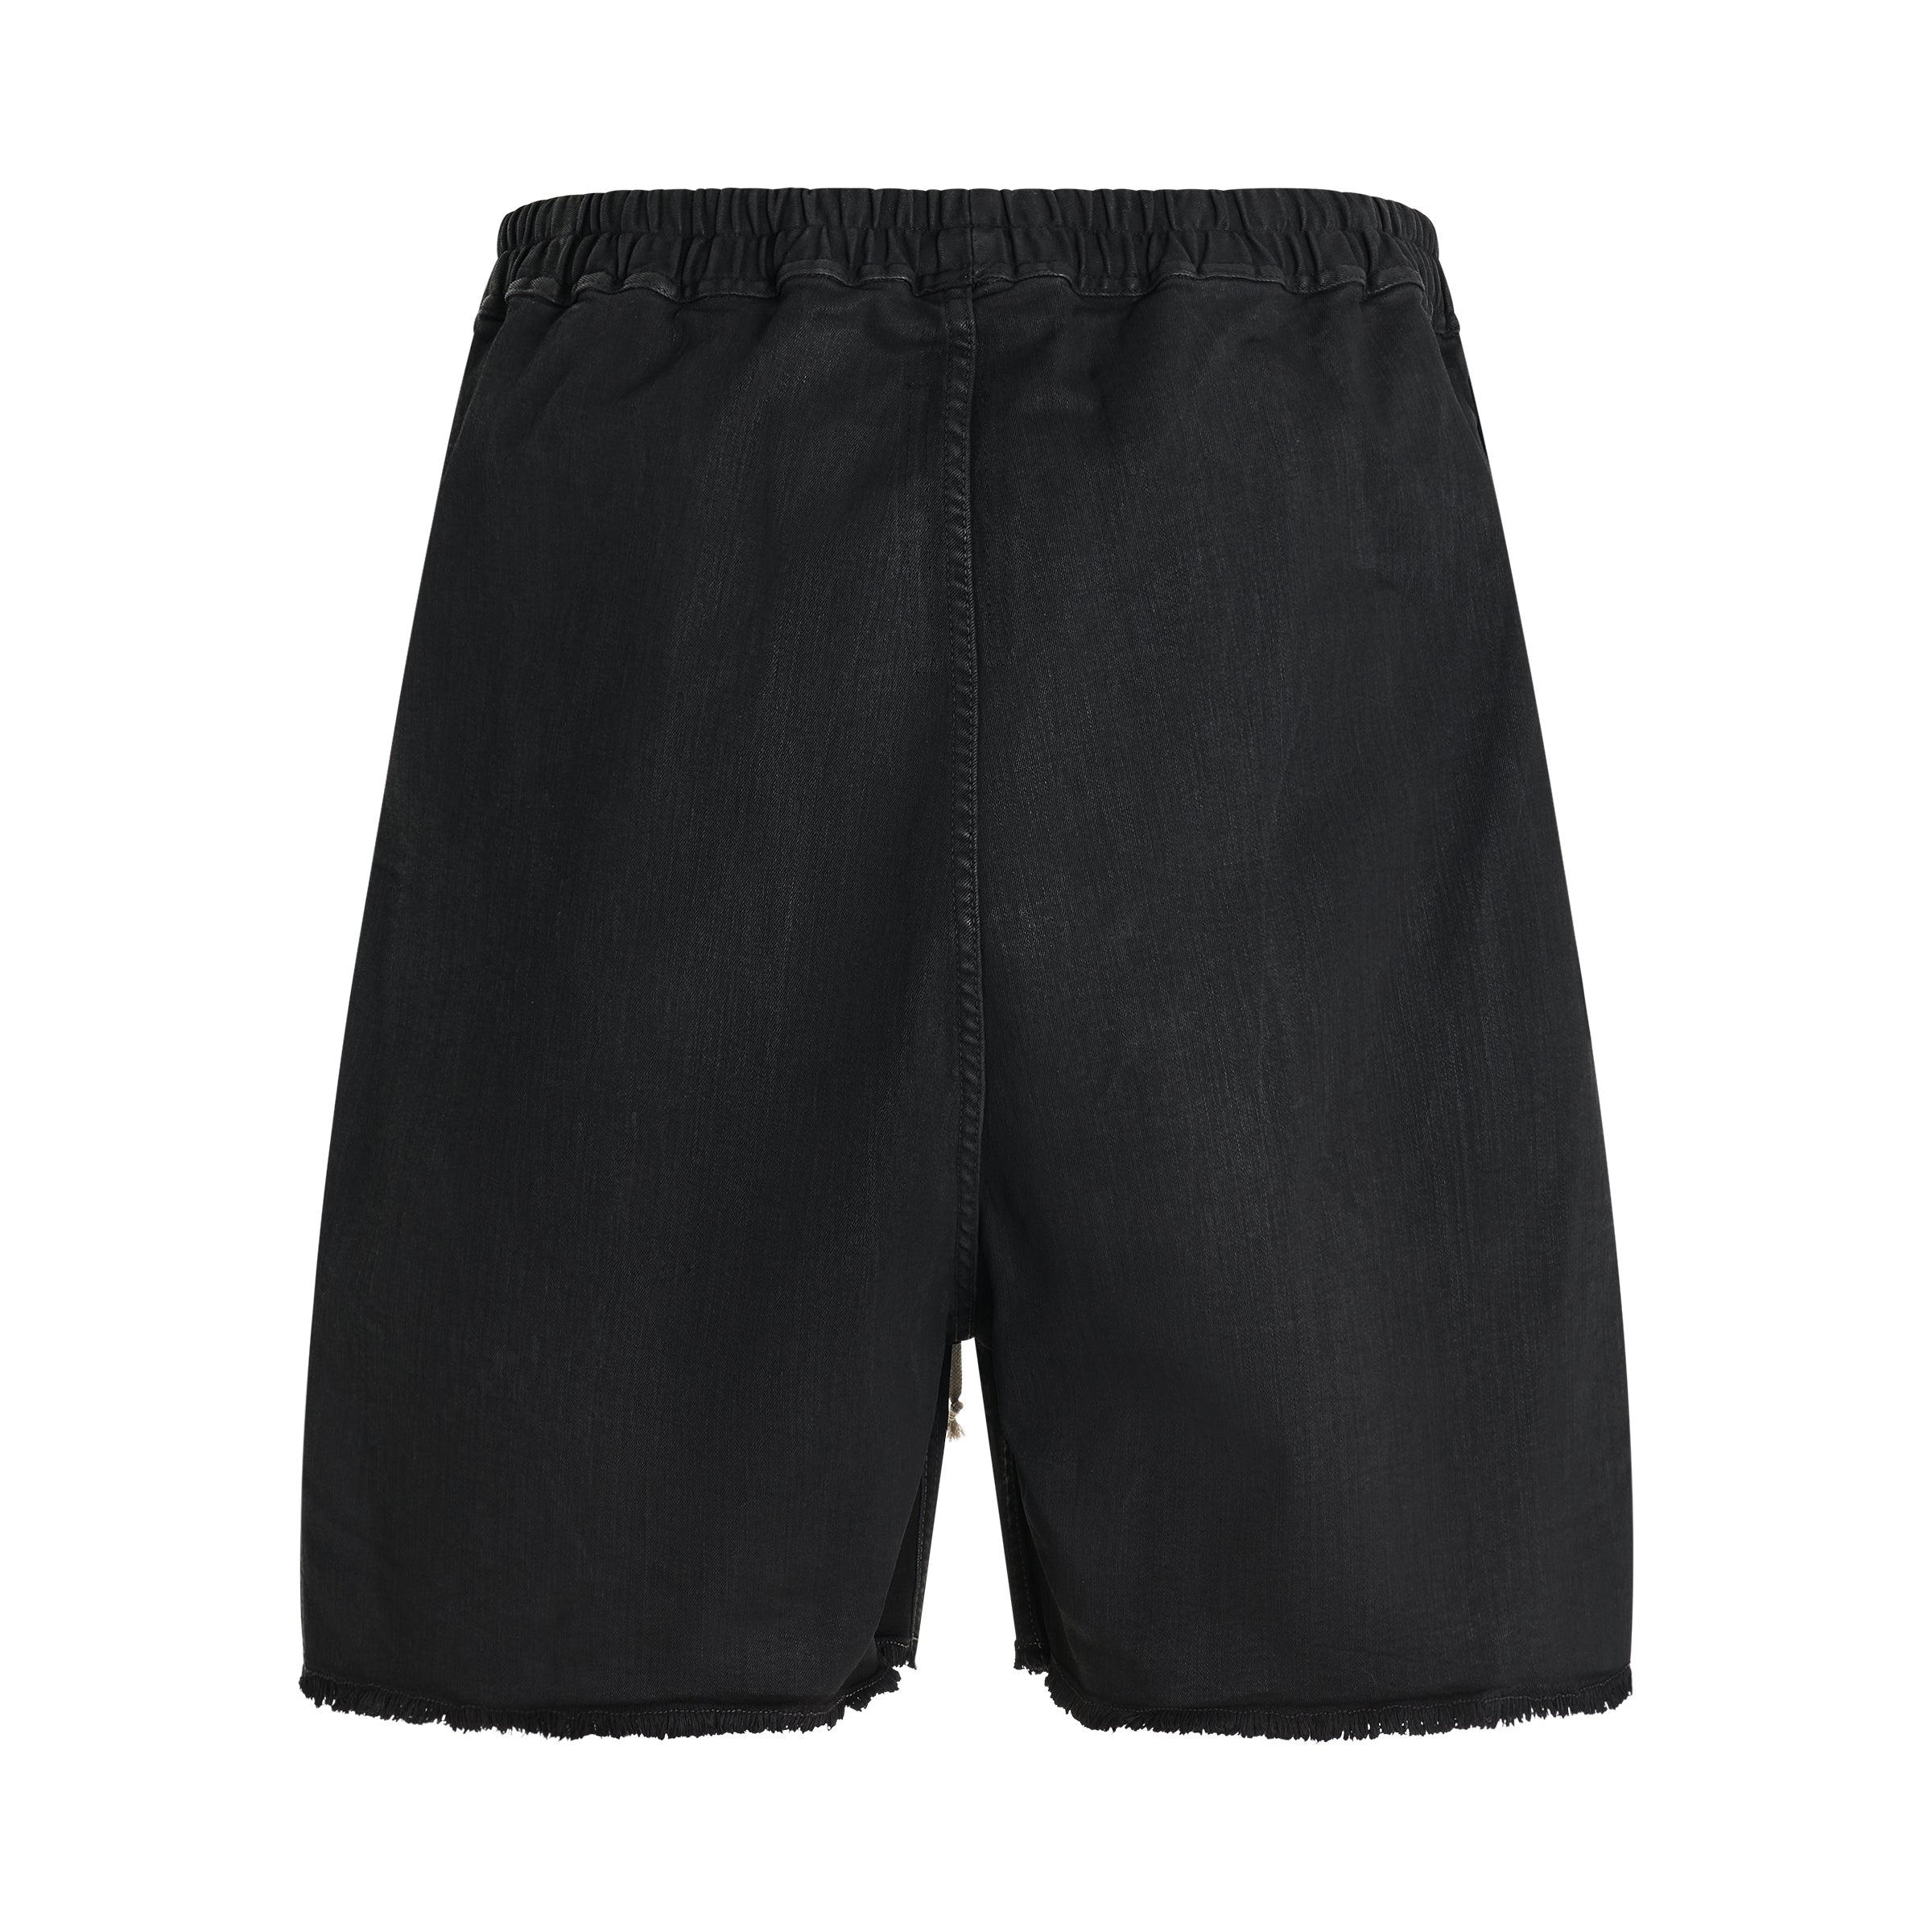 Long Boxers Shorts in Black Wax - 4